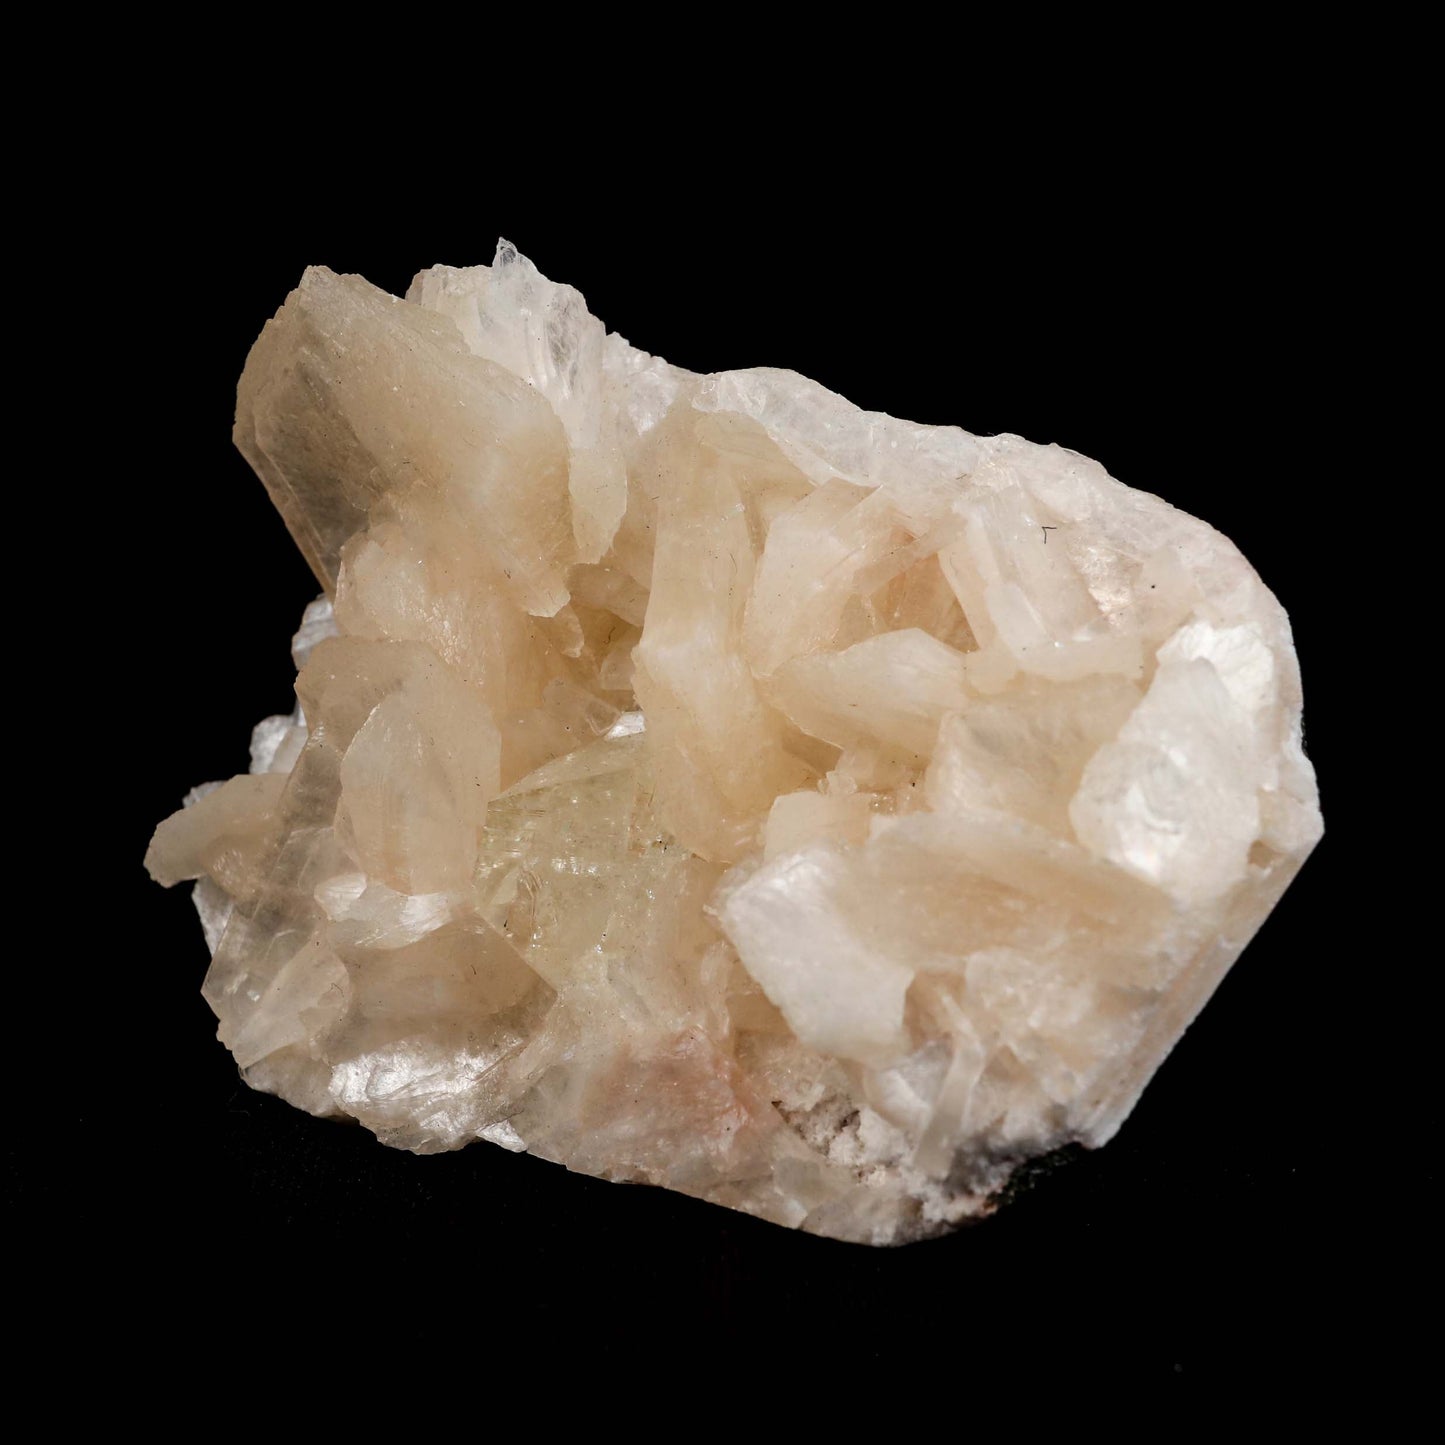 Powellite with Stilbite Rare Find Natural Mineral Specimen # B 4992  https://www.superbminerals.us/products/powellite-with-stilbite-rare-find-natural-mineral-specimen-b-4992  Features:&nbsp;Lustrous powellite crystals in a nest of lustrous, ivory colored stilbite crystals. The powellite crystal fluoresces a bright yellow with stilbite. Very rare and unique specimen.Primary Mineral(s): PowelliteSecondary Mineral(s):&nbsp;N/AMatrix: N/A 3 Inch x 2 InchWeight : 125 GmsLocality: Nashik